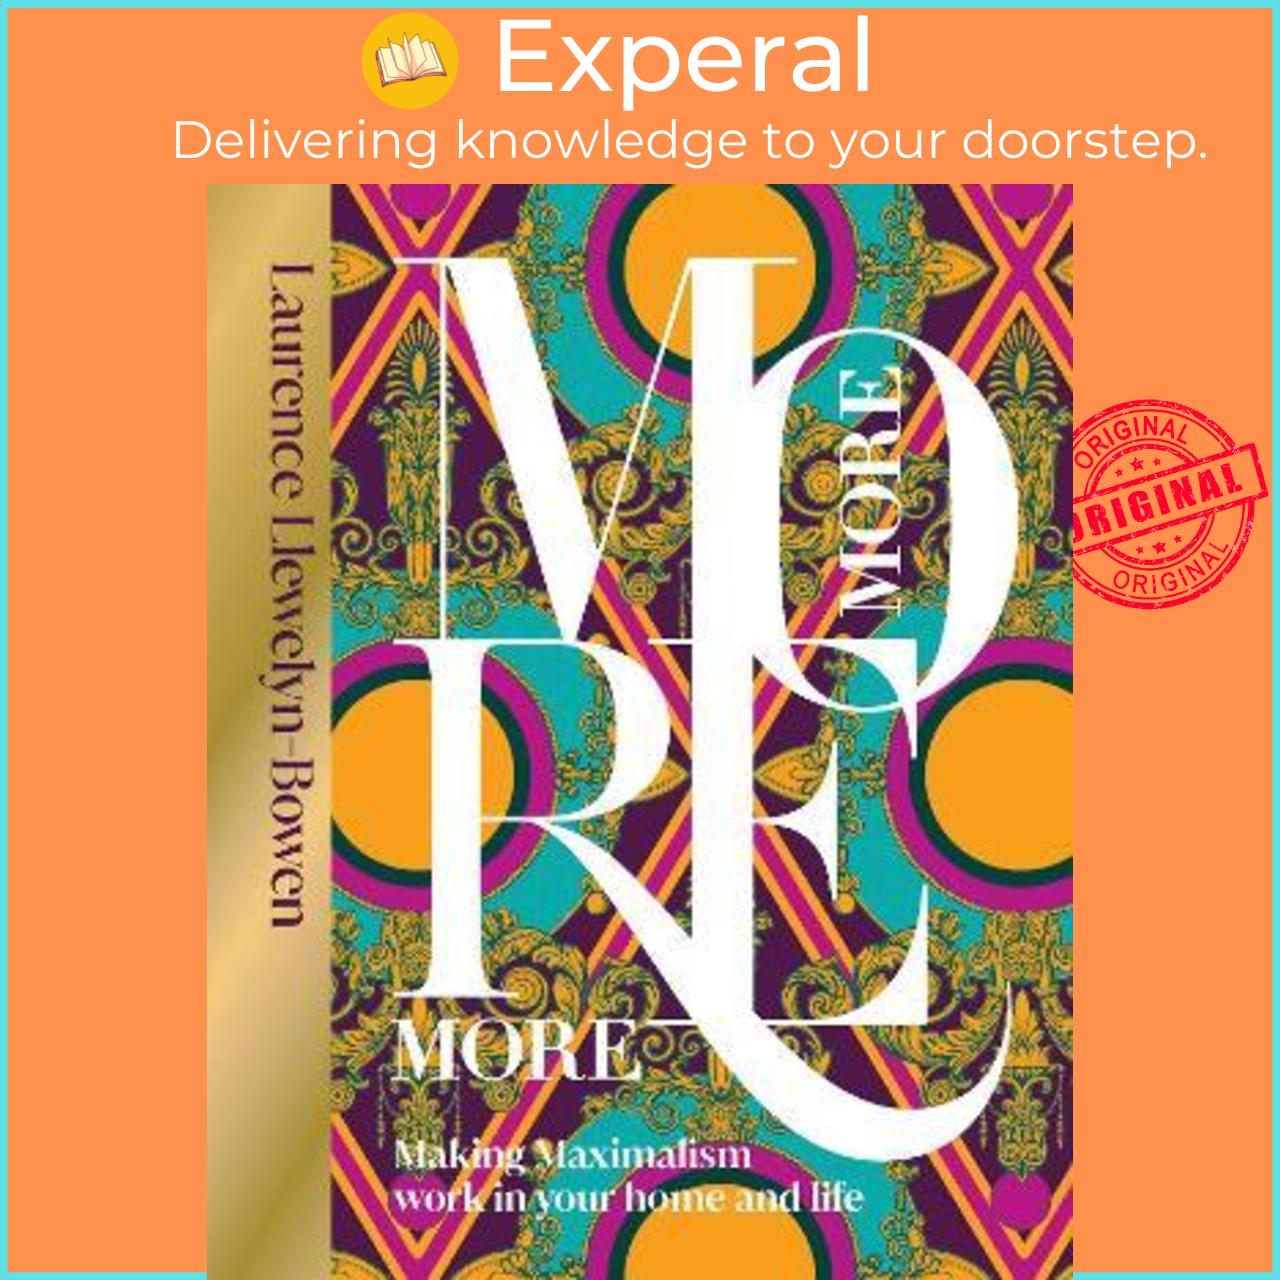 Hình ảnh Sách - More More More : Making Maximalism Work in Your Home and Life by Laurence Llewelyn-Bowen (UK edition, hardcover)